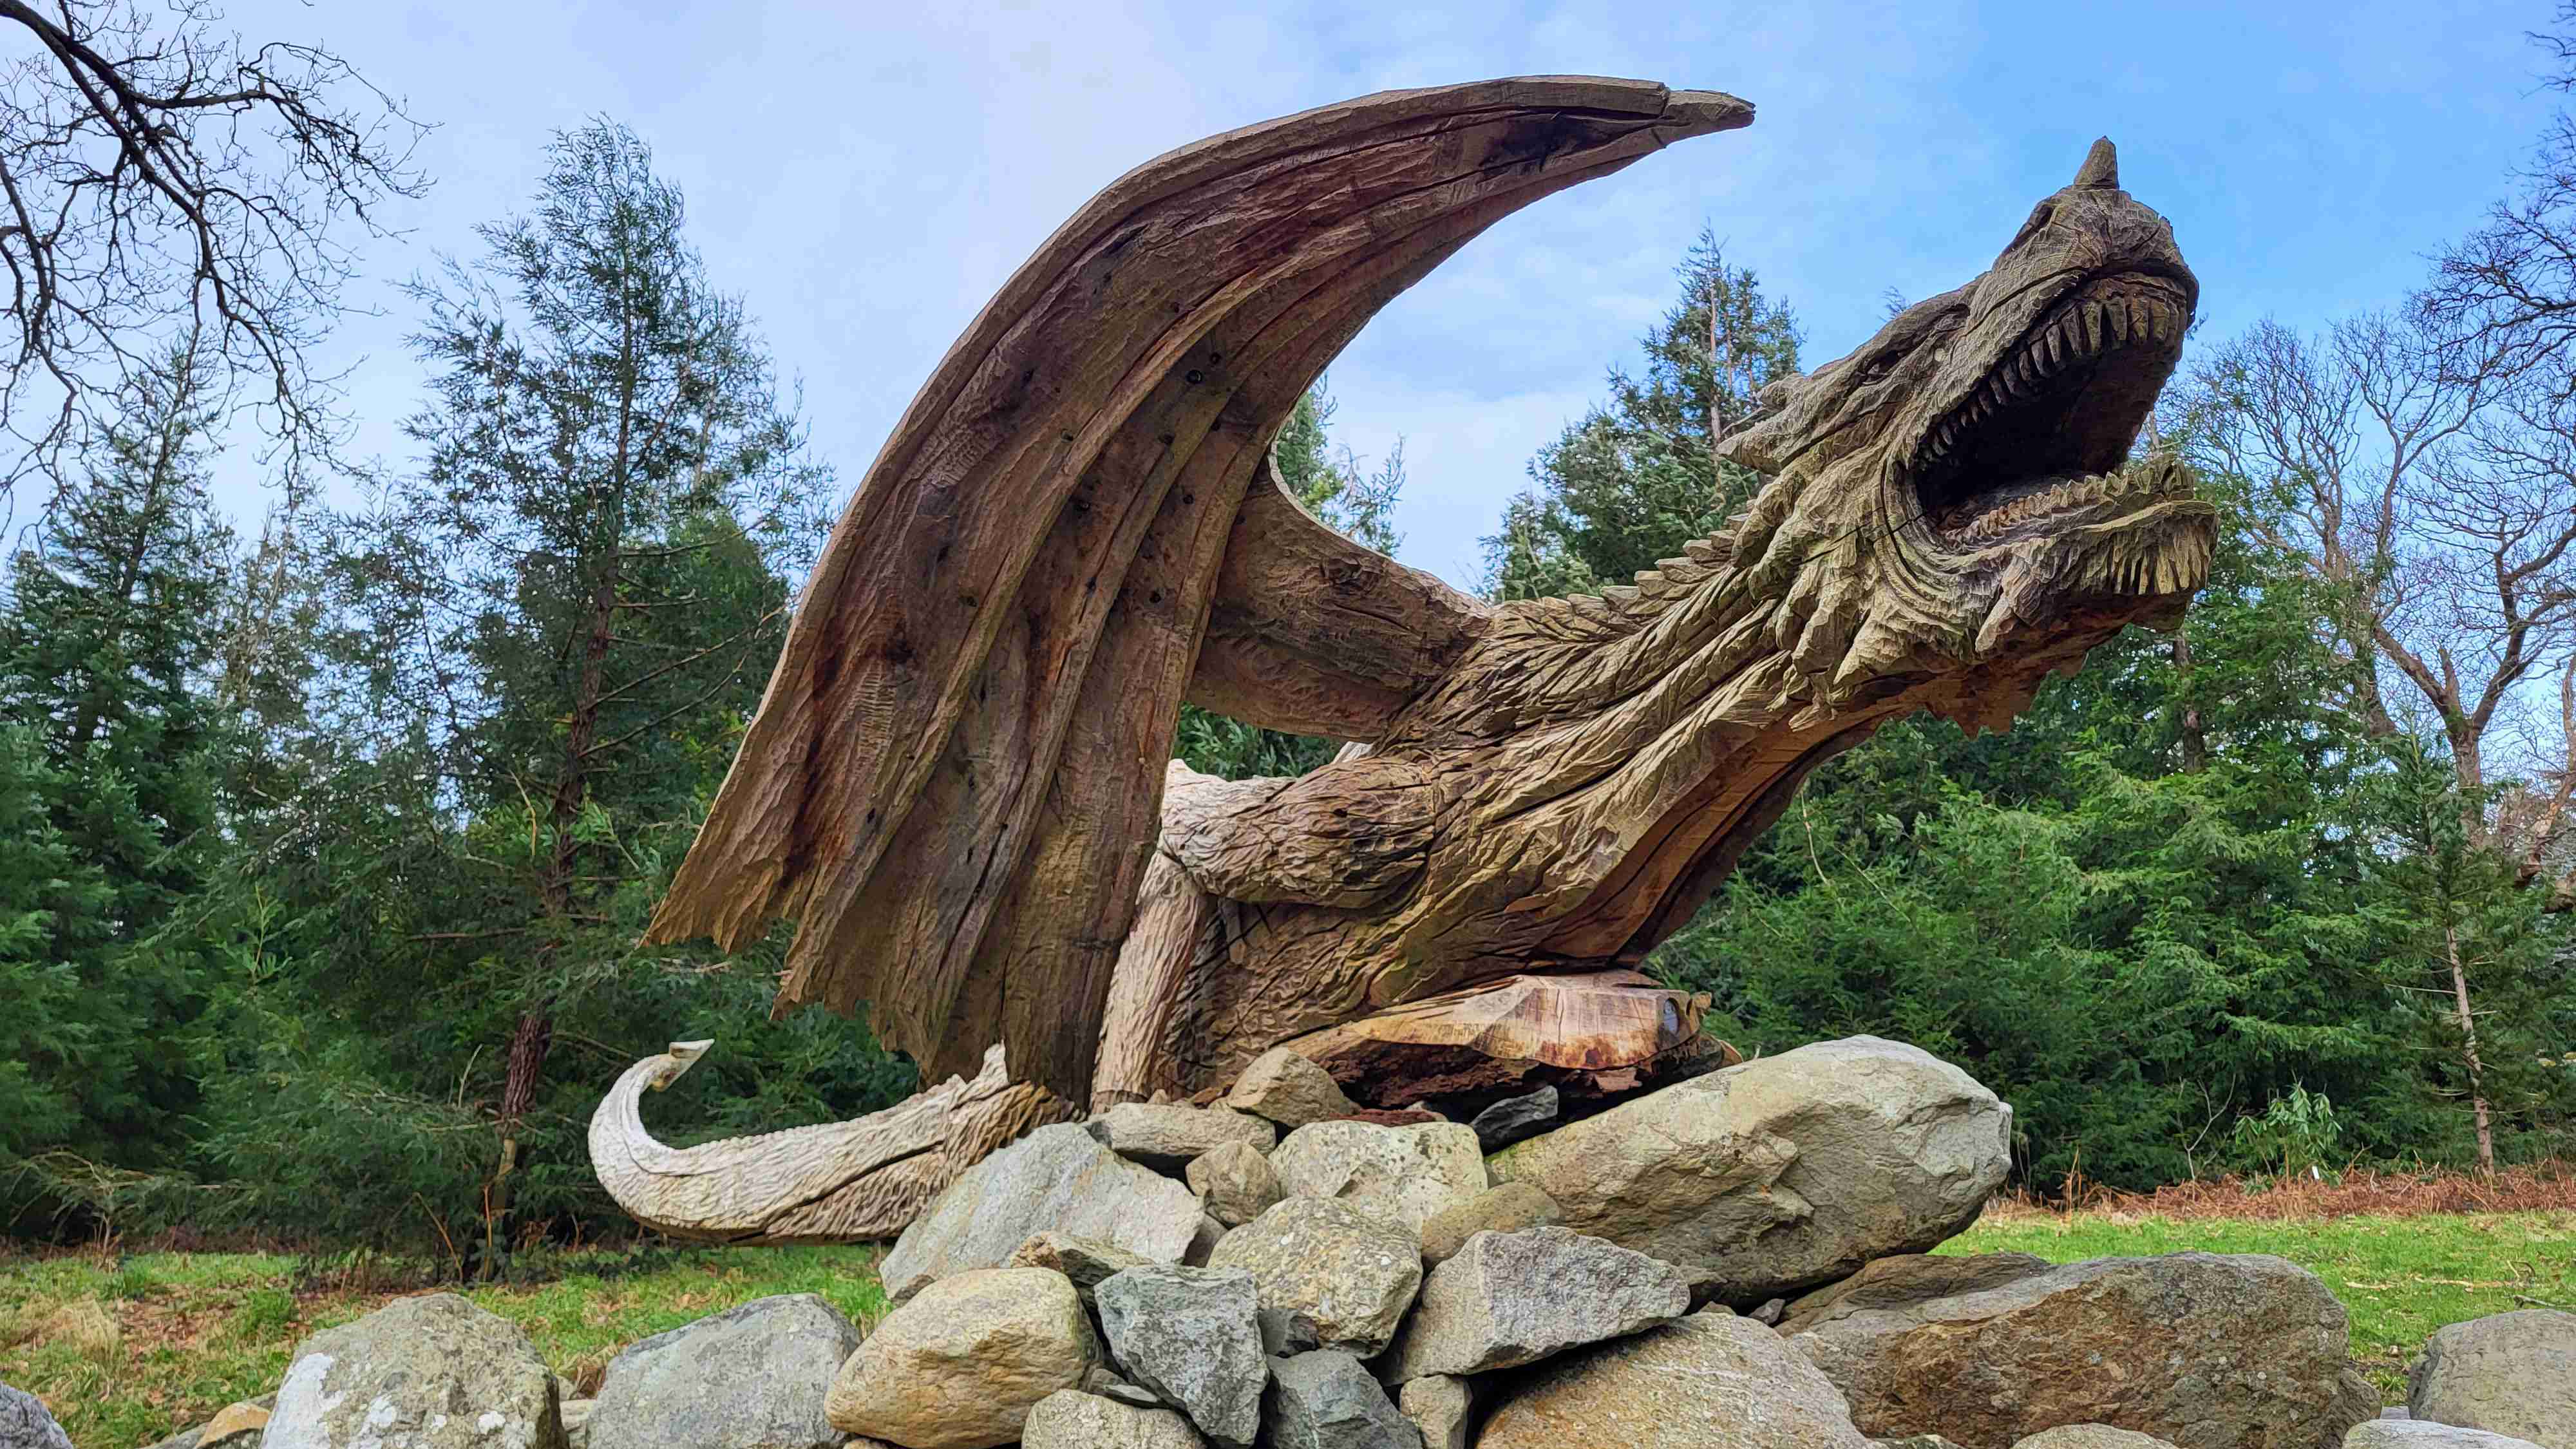 A wooden dragon carved from a fallen oak tree at Tregarth, near Bethesda North Wales. /Keith Withers for CGTN Europe